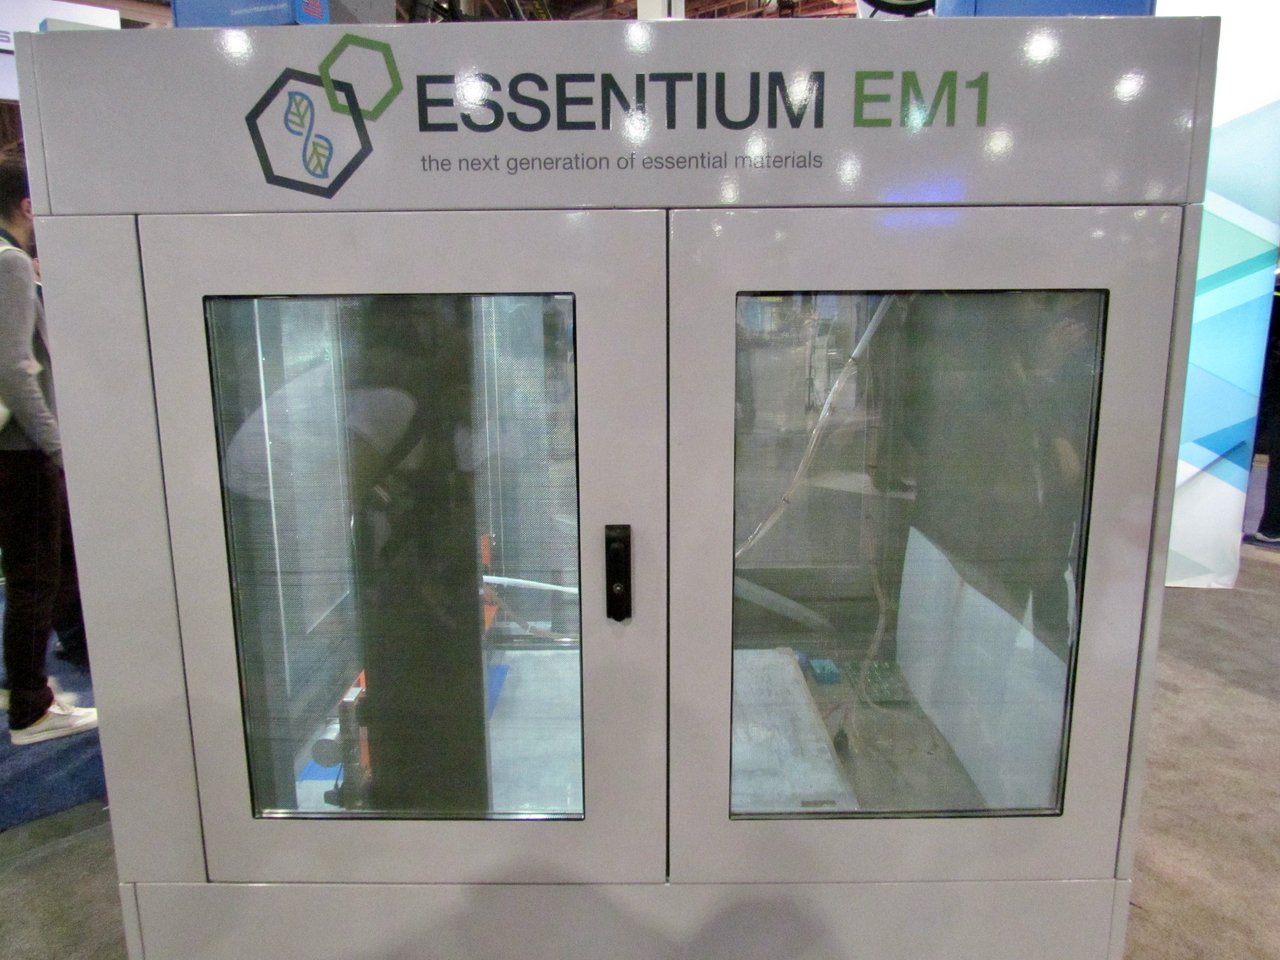  The Essentium EM1, used for development of the electromagnetic 3D printing process 